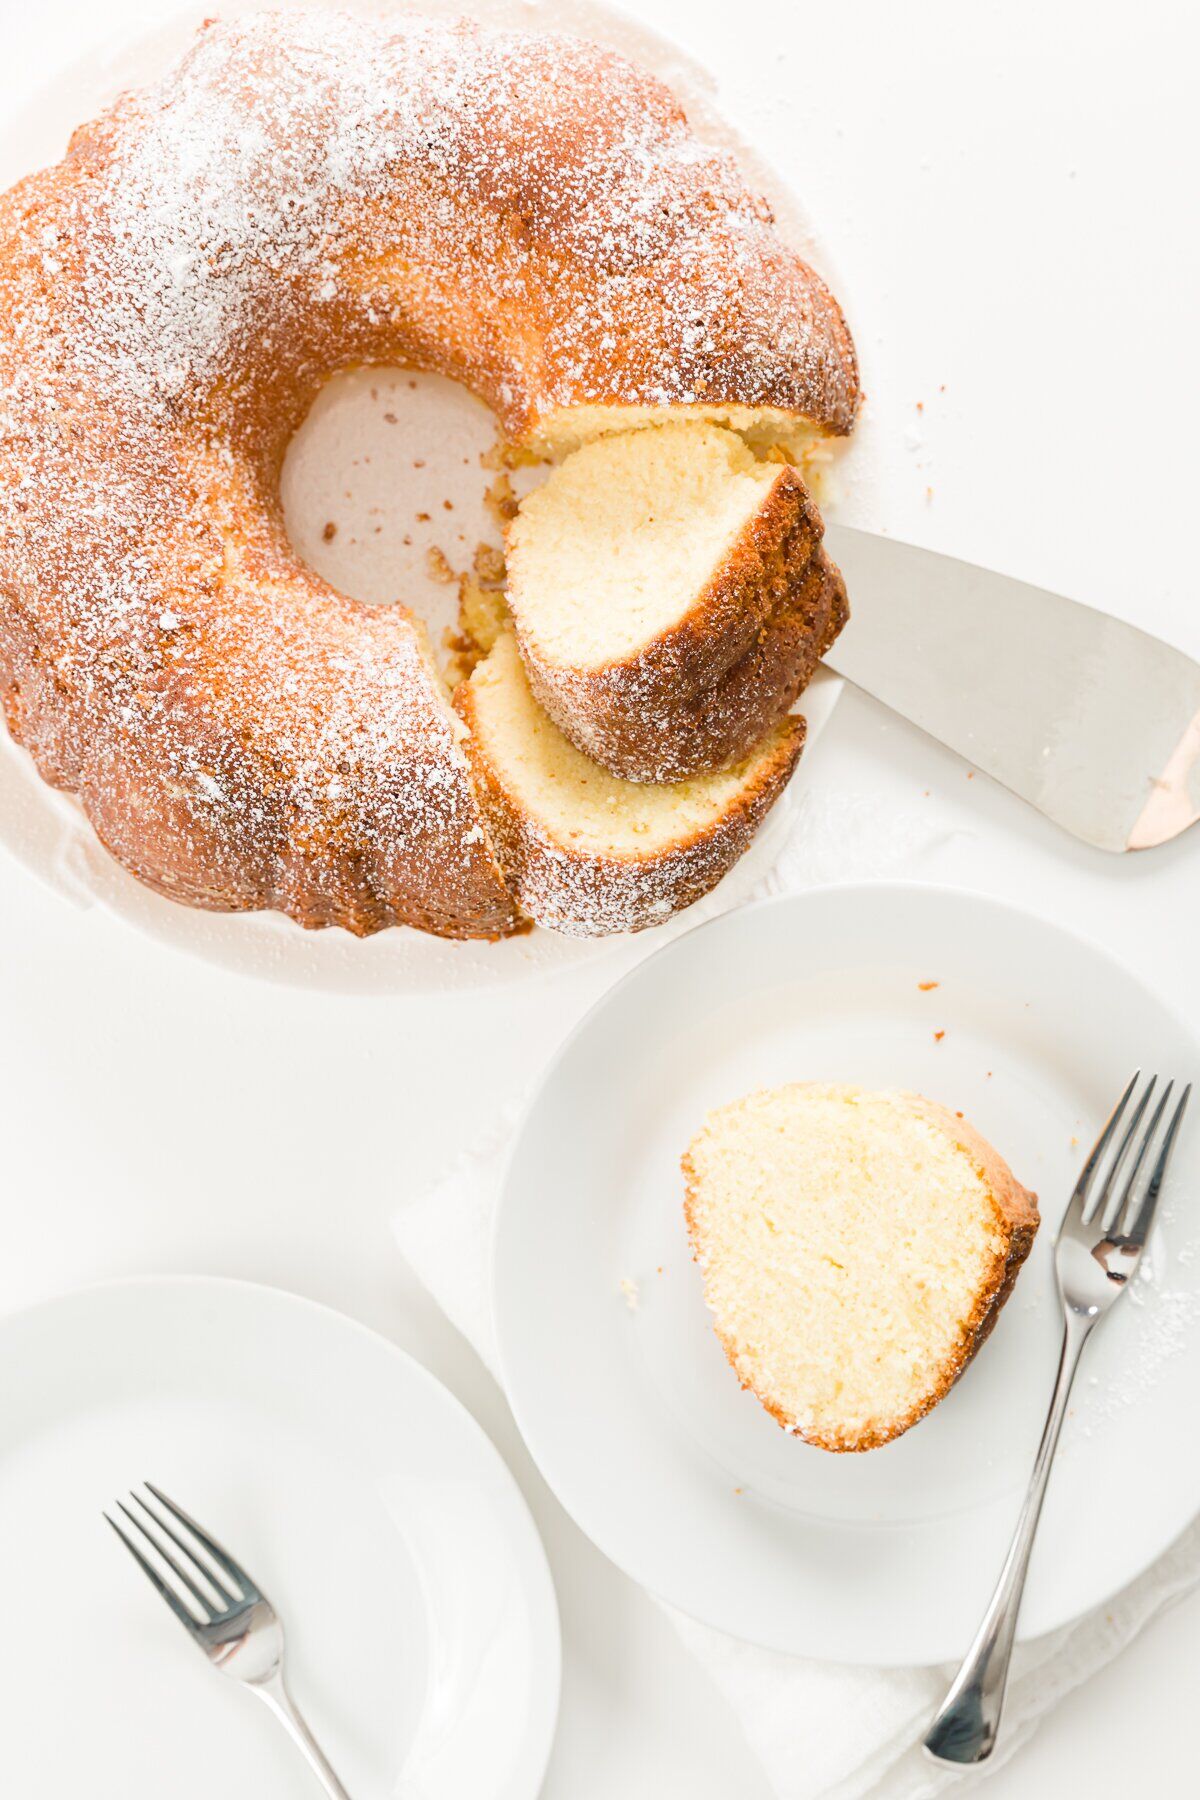 Pound cake with a slice removed and placed on a separate plate with a fork